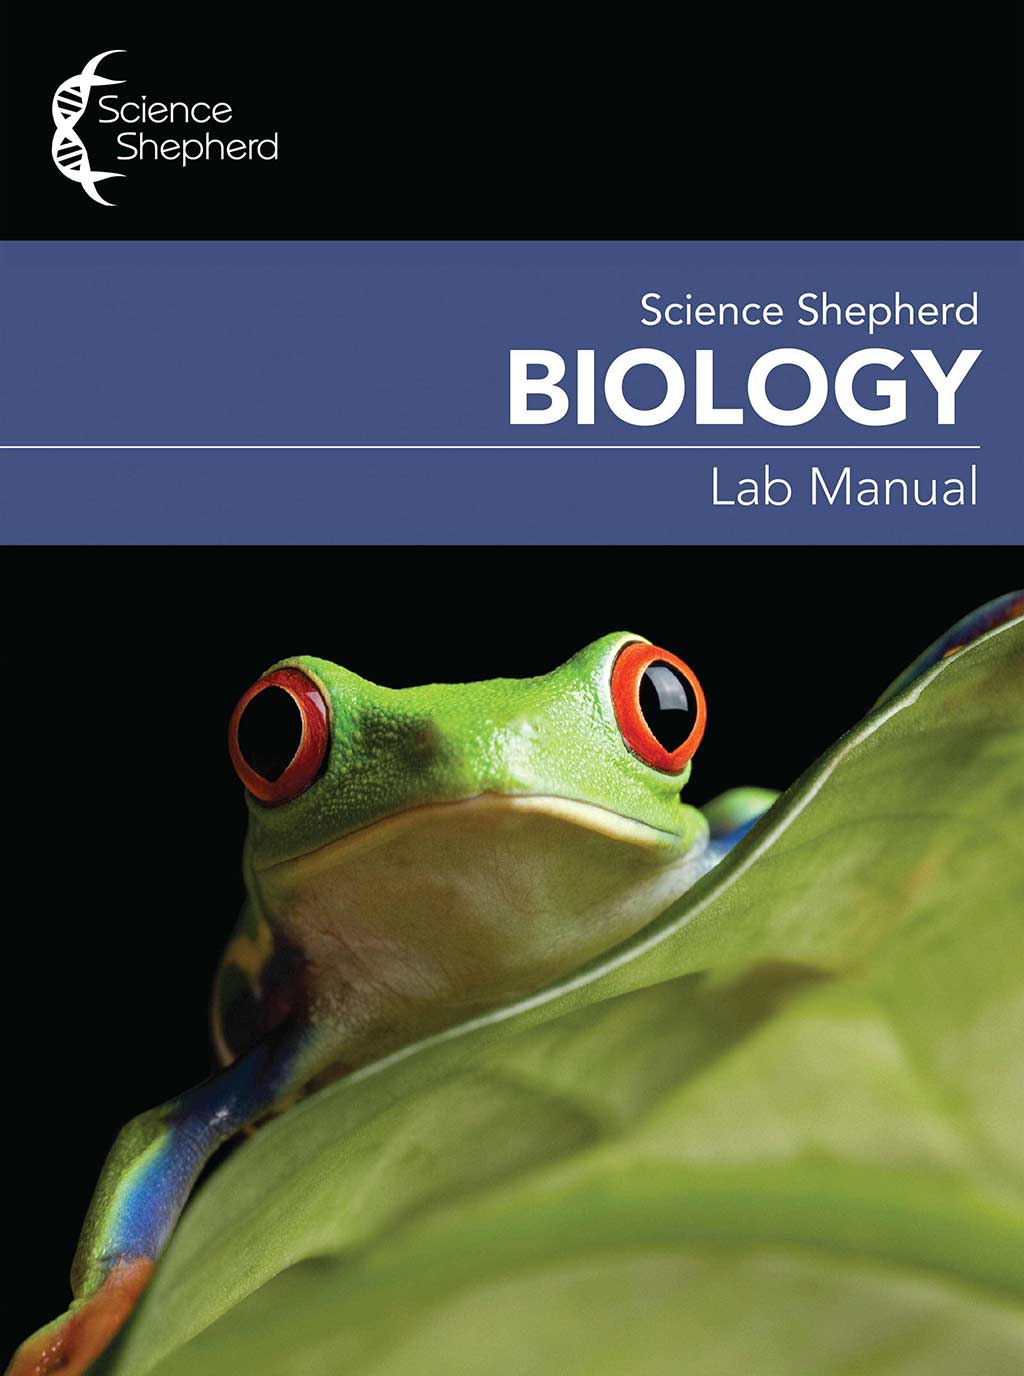 Science Shepherd Biology homeschool science labs manual cover with frog on a green leaf